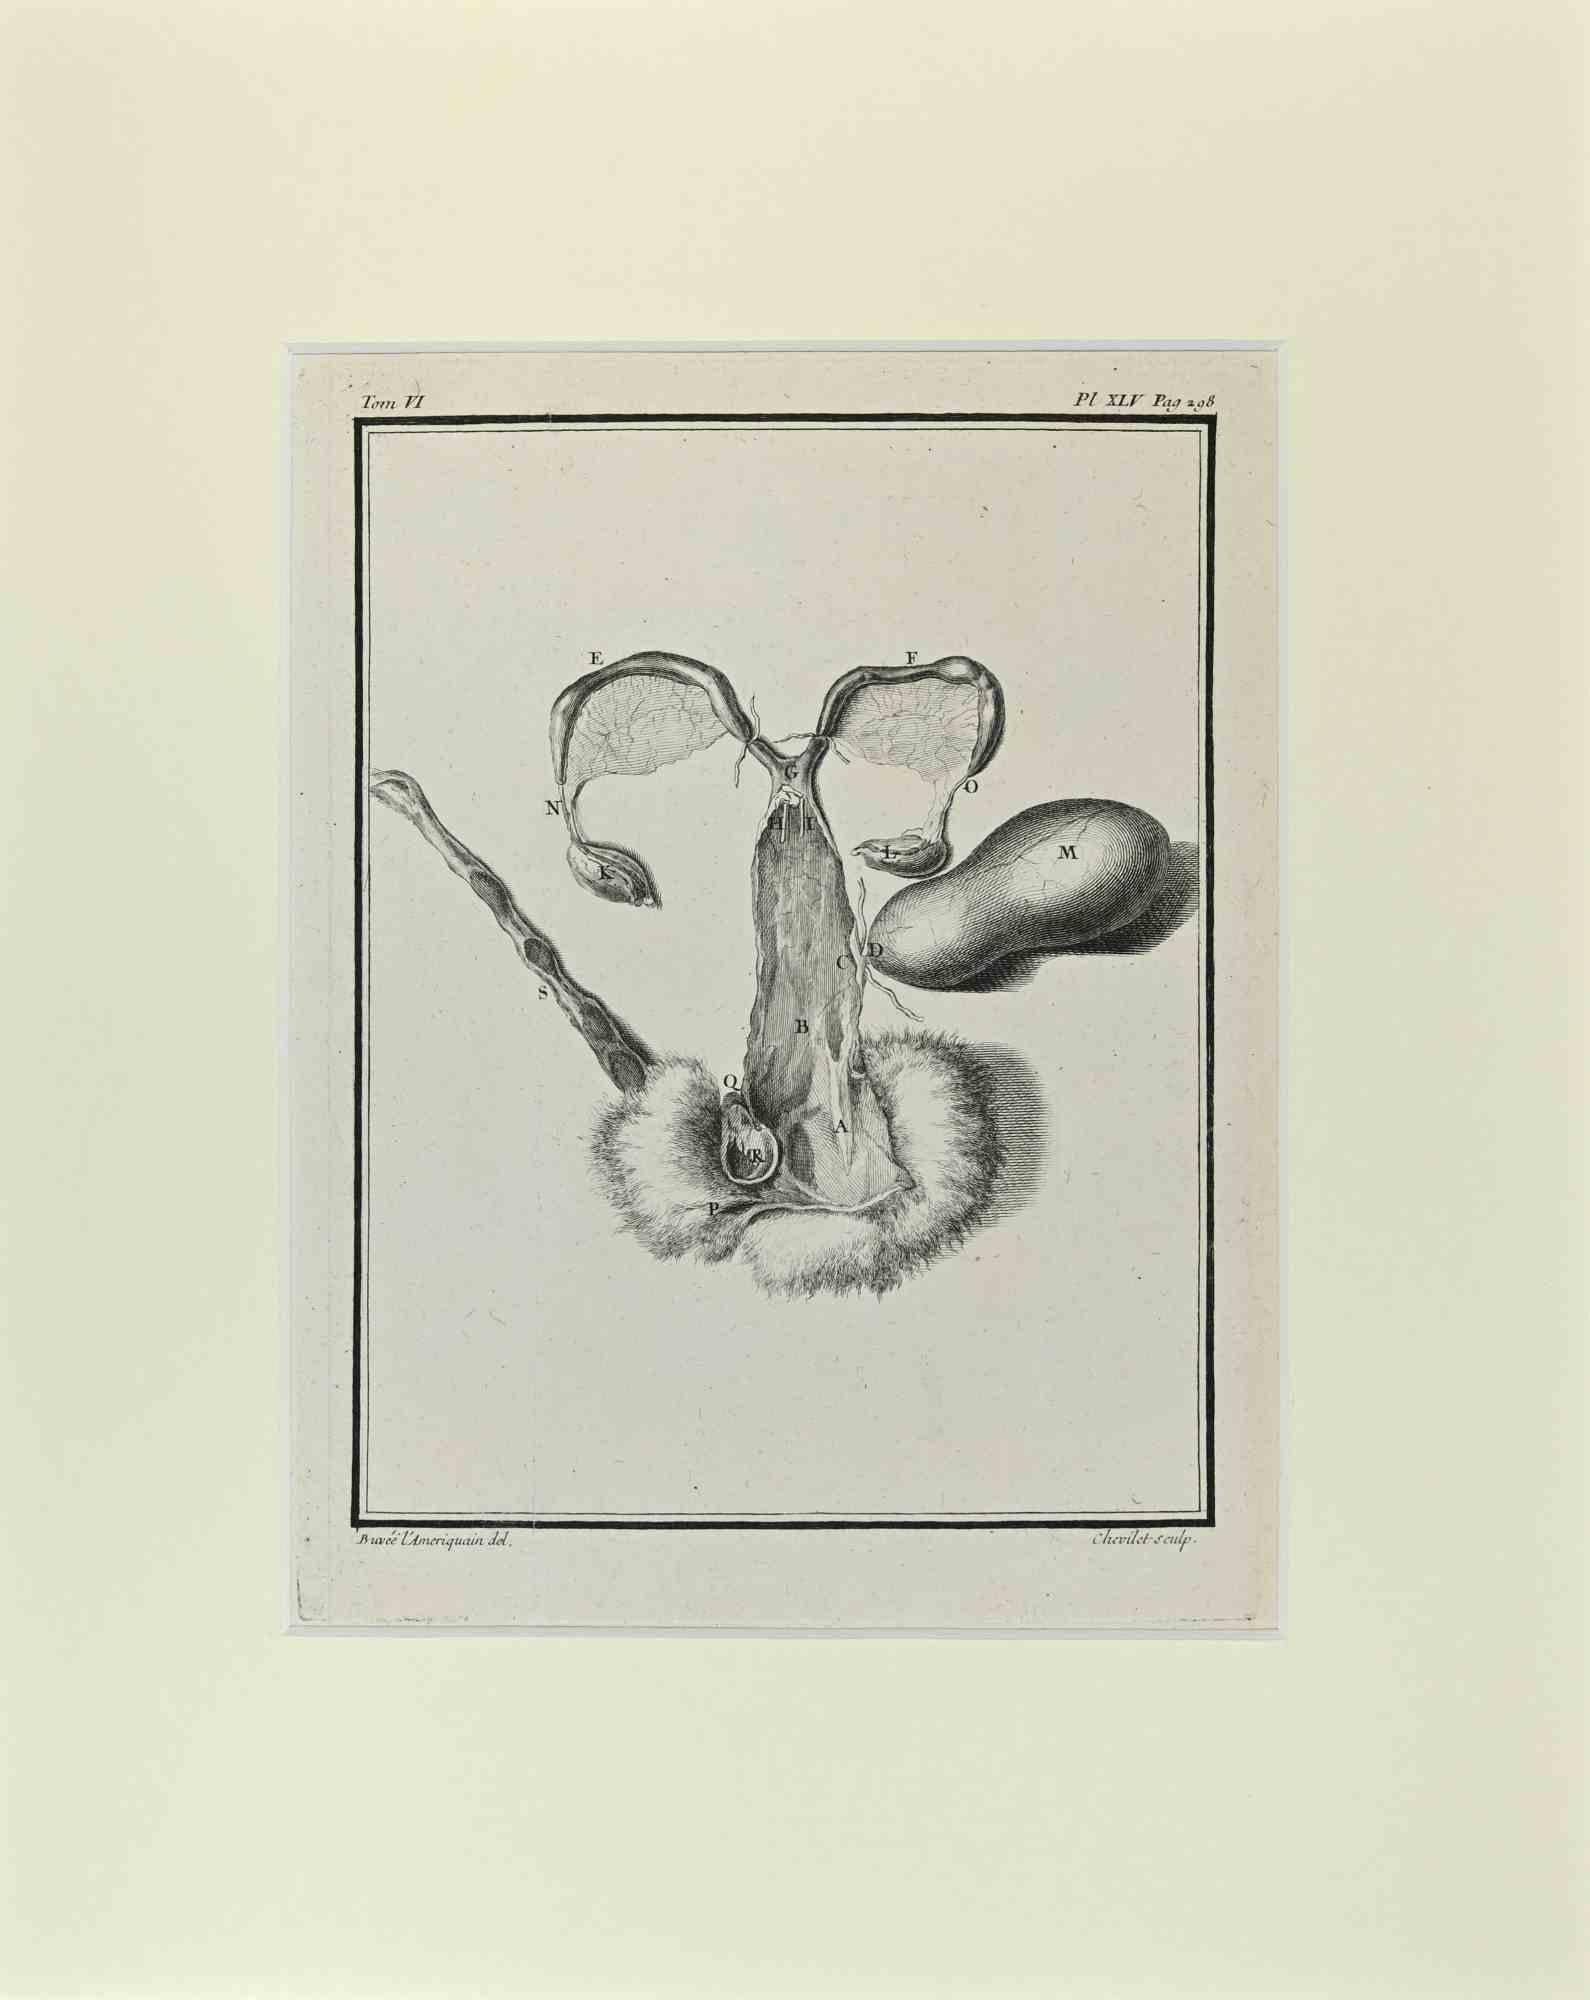 Anatomy veterinary is an artwork realized  by  Buvée l'Américain in 1771.  

Etching B./W. print  on ivory paper. Signed on  plate on the lower left margin.

The work is glued on cardboard. Total dimensions: 35x28 cm.

The artwork belongs to the